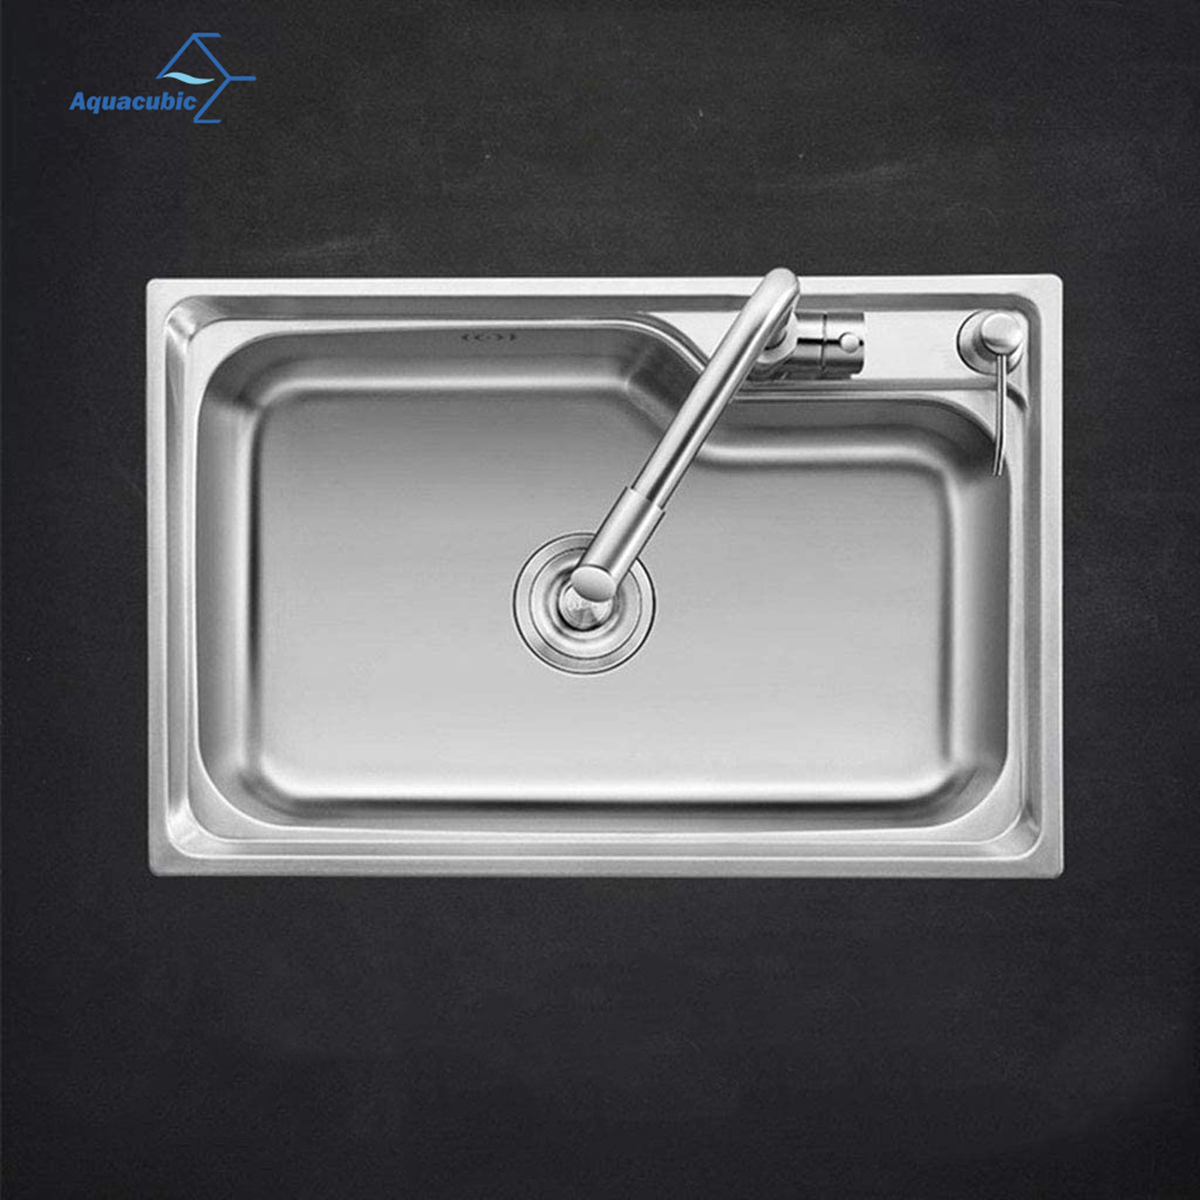 Hot South America SUS 201 deep drawn single bowl 580 x 440 x 200 mm Stainless Steel Pressed / Drawn Kitchen Sink